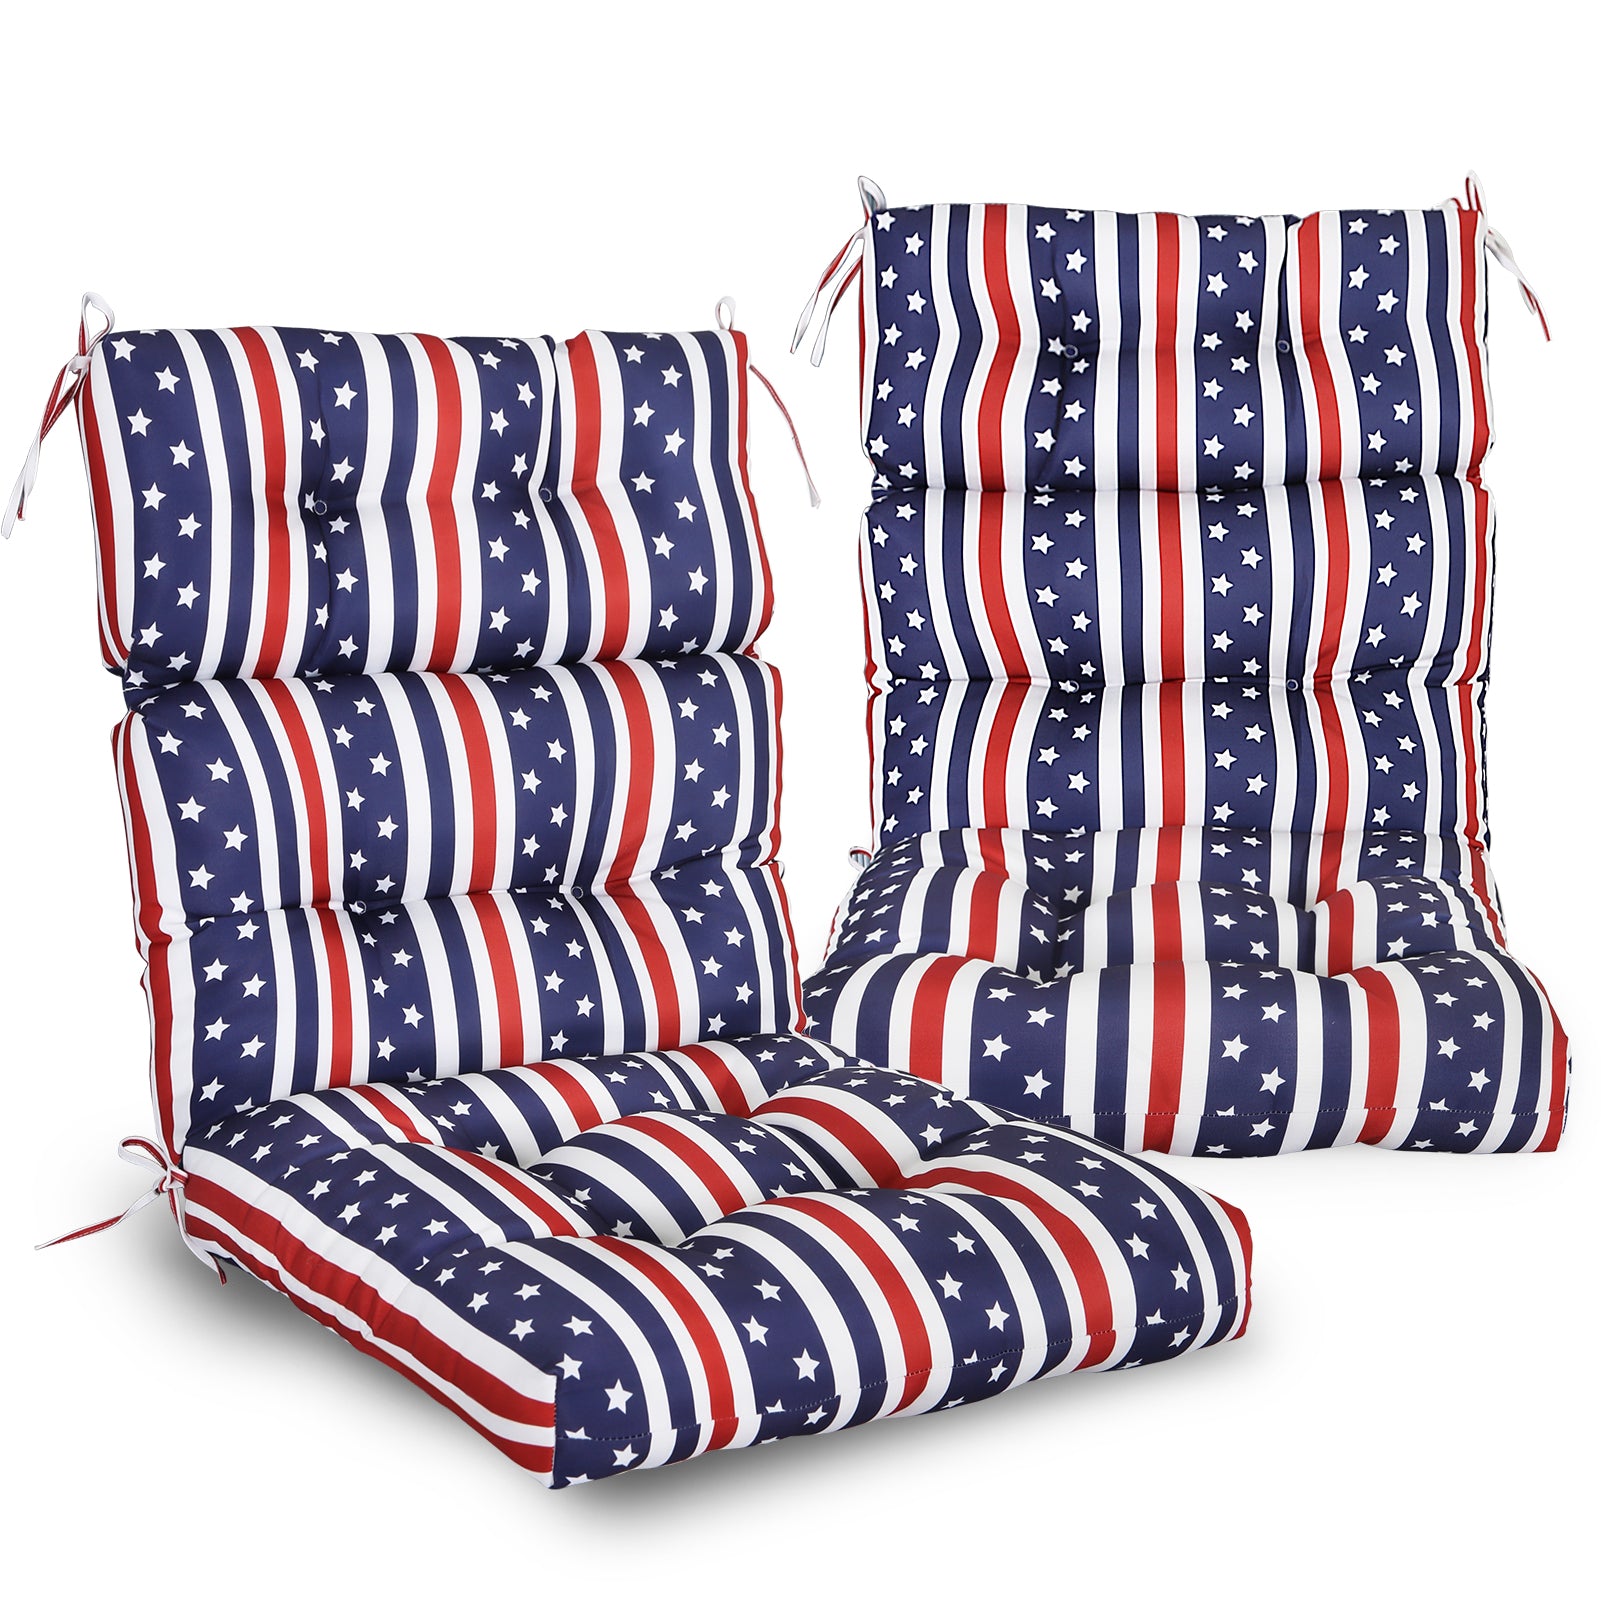 EAGLE PEAK Tufted Outdoor/Indoor High Back Patio Chair Cushion, Set of